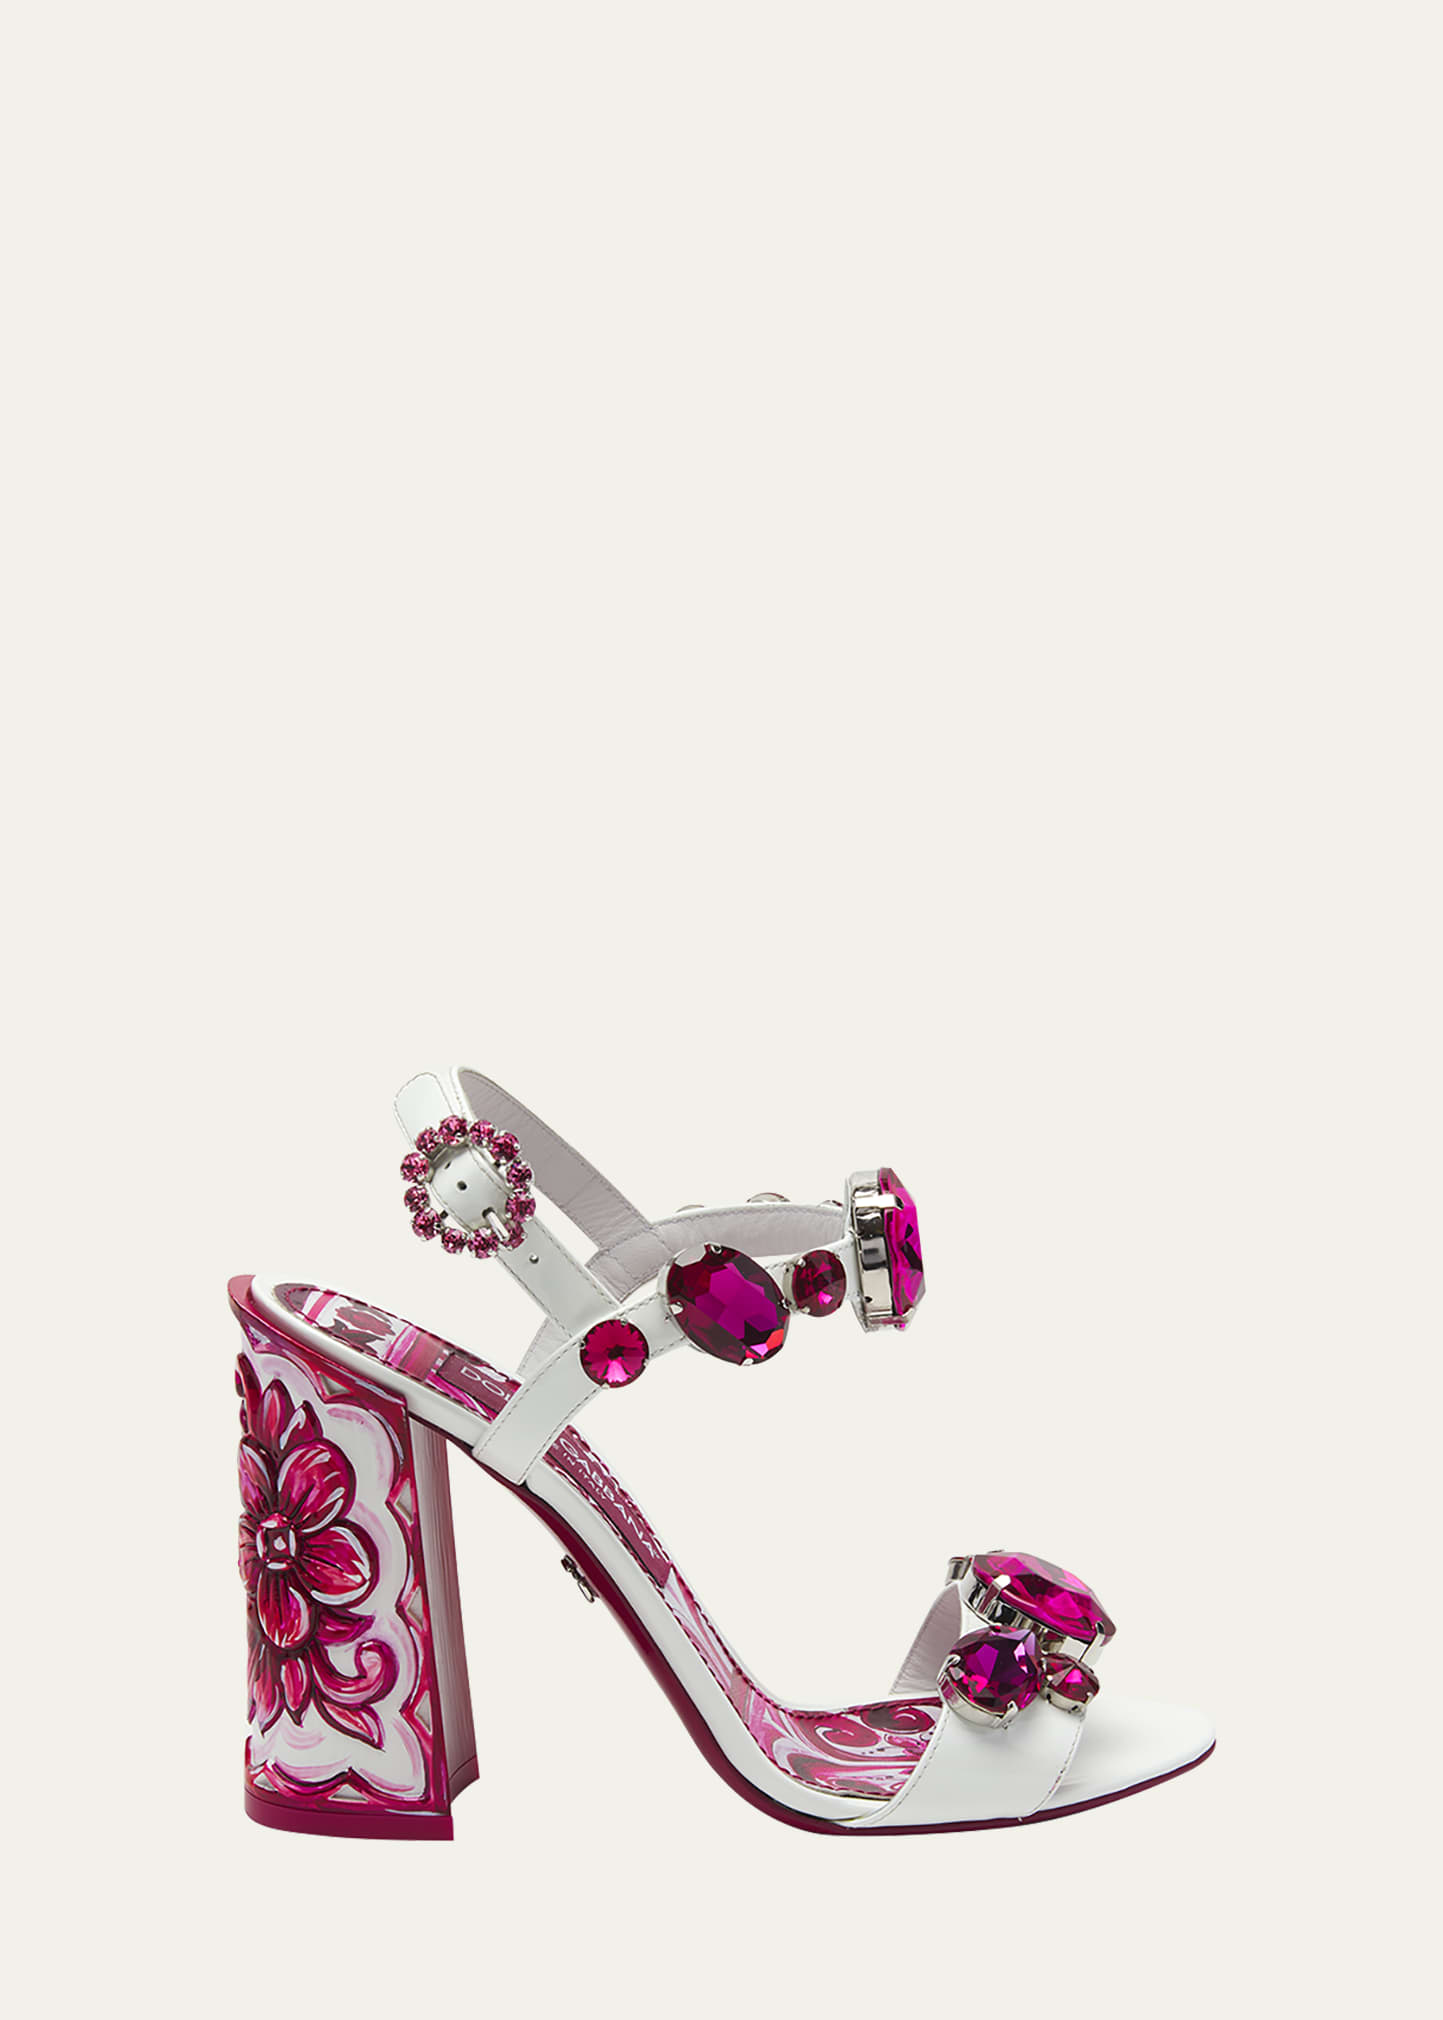 Dolce & Gabbana Jeweled Tile-Print Patent Leather Sandals